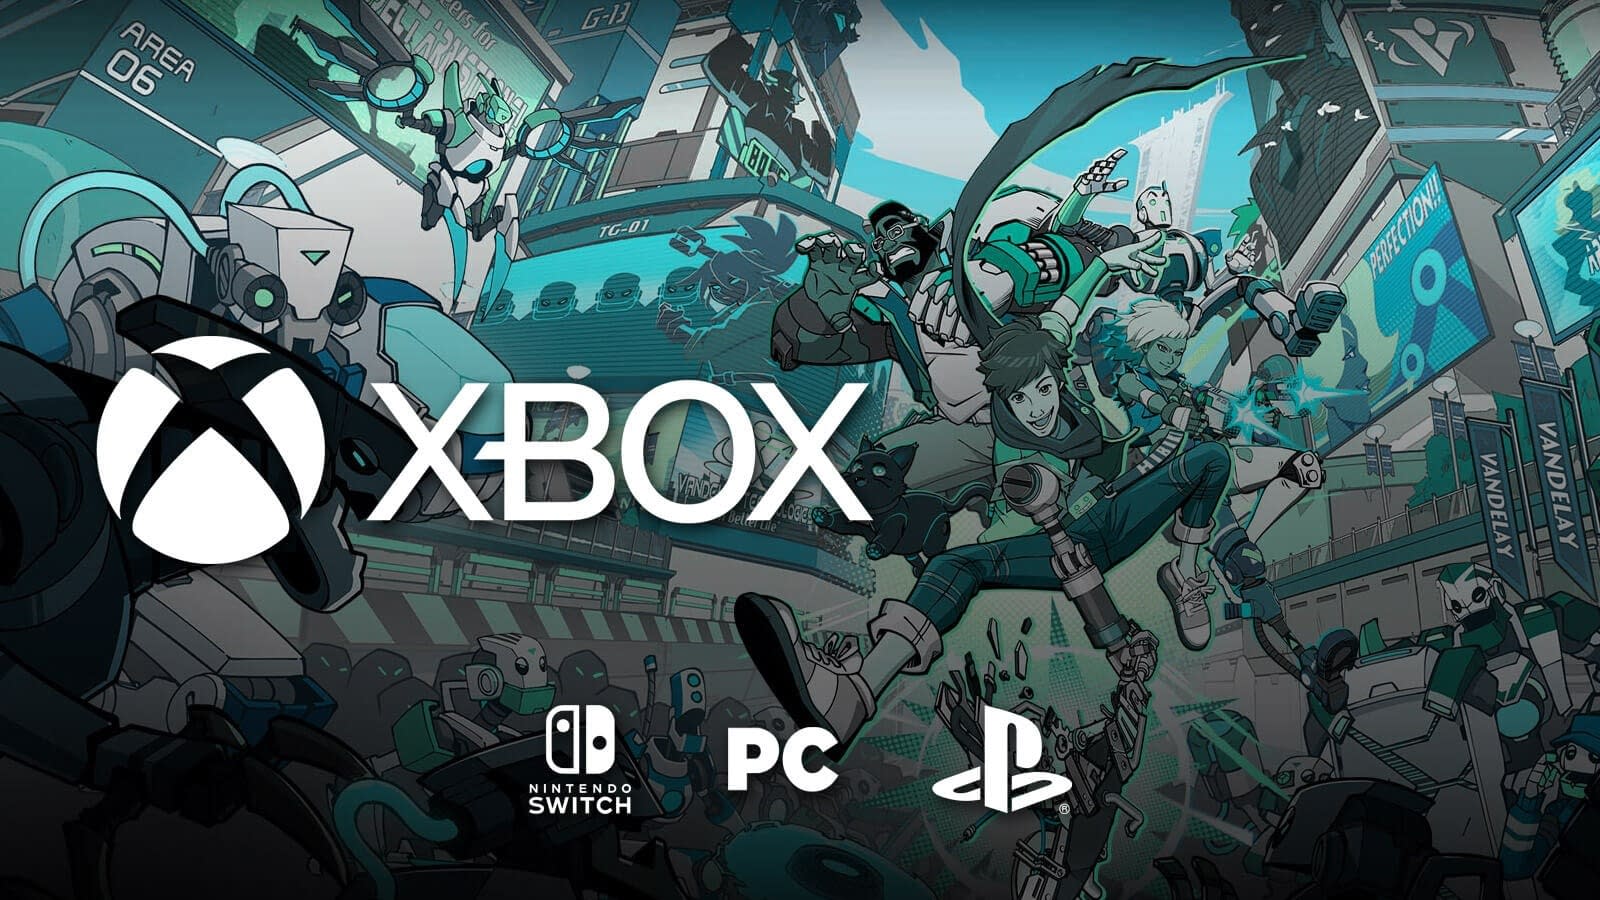 Interview: Comes to the Favorite Xbox Game Switch Platform